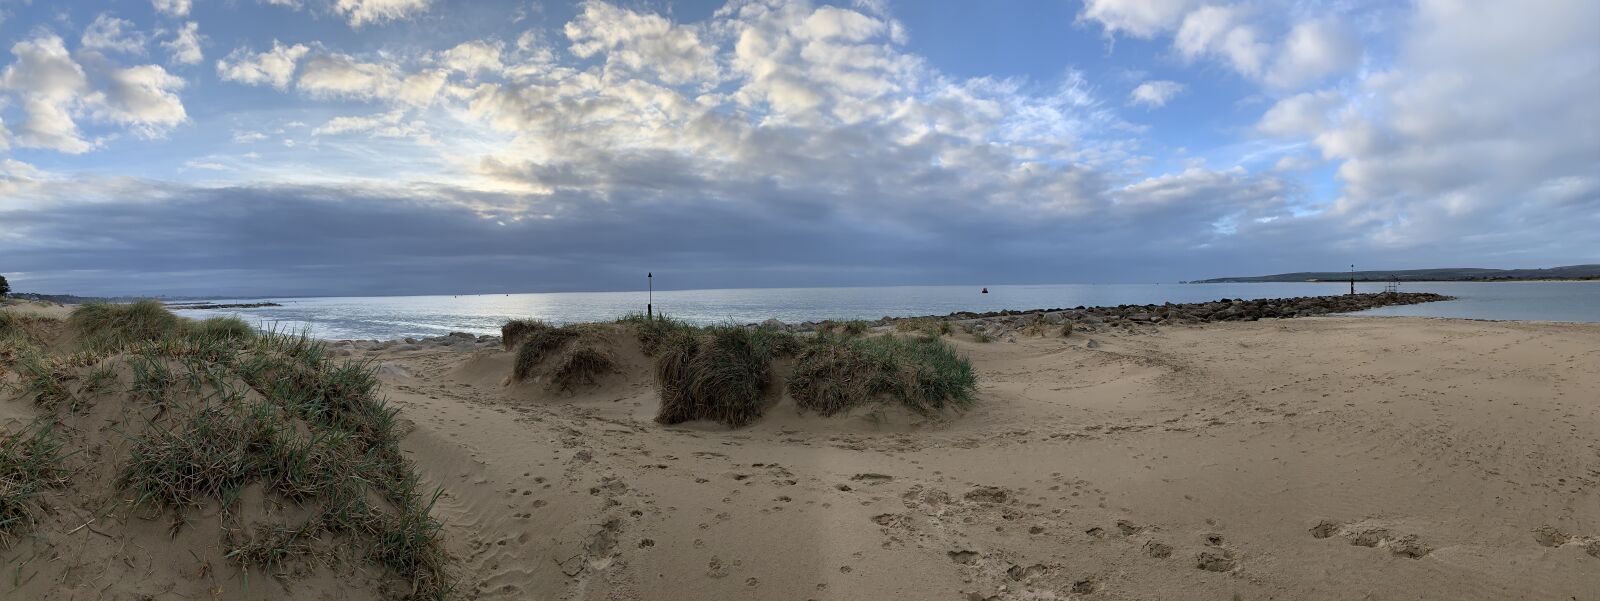 Apple iPhone XS Max + iPhone XS Max back camera 4.25mm f/1.8 sample photo. Beach, clouds, sunrise photography